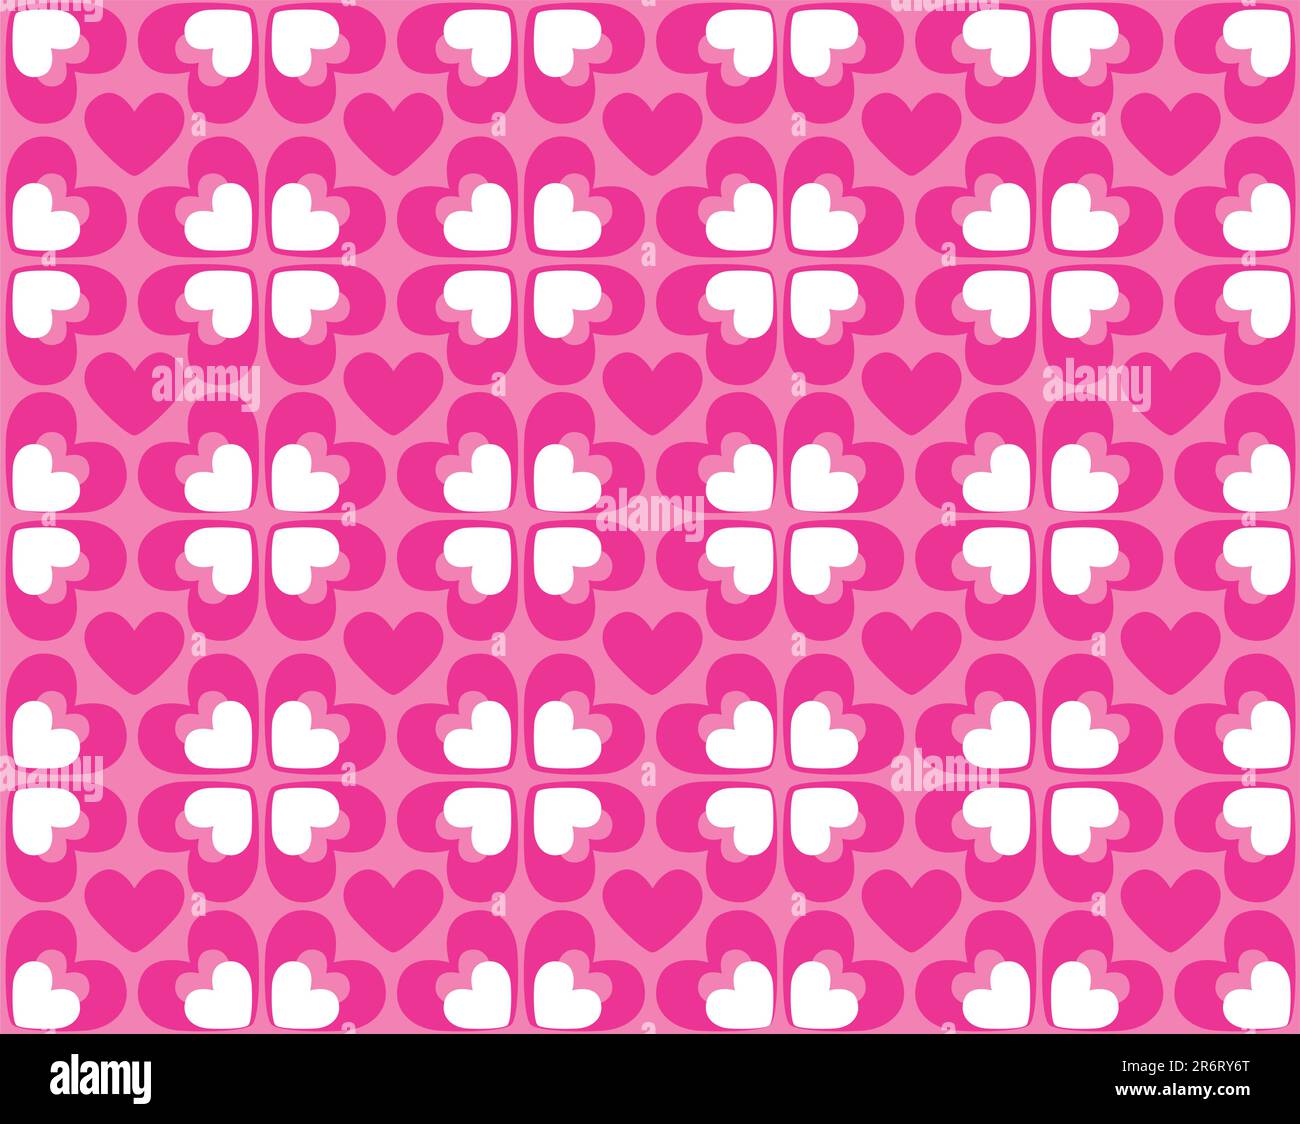 Seamless heart pattern in pink and white Stock Vector